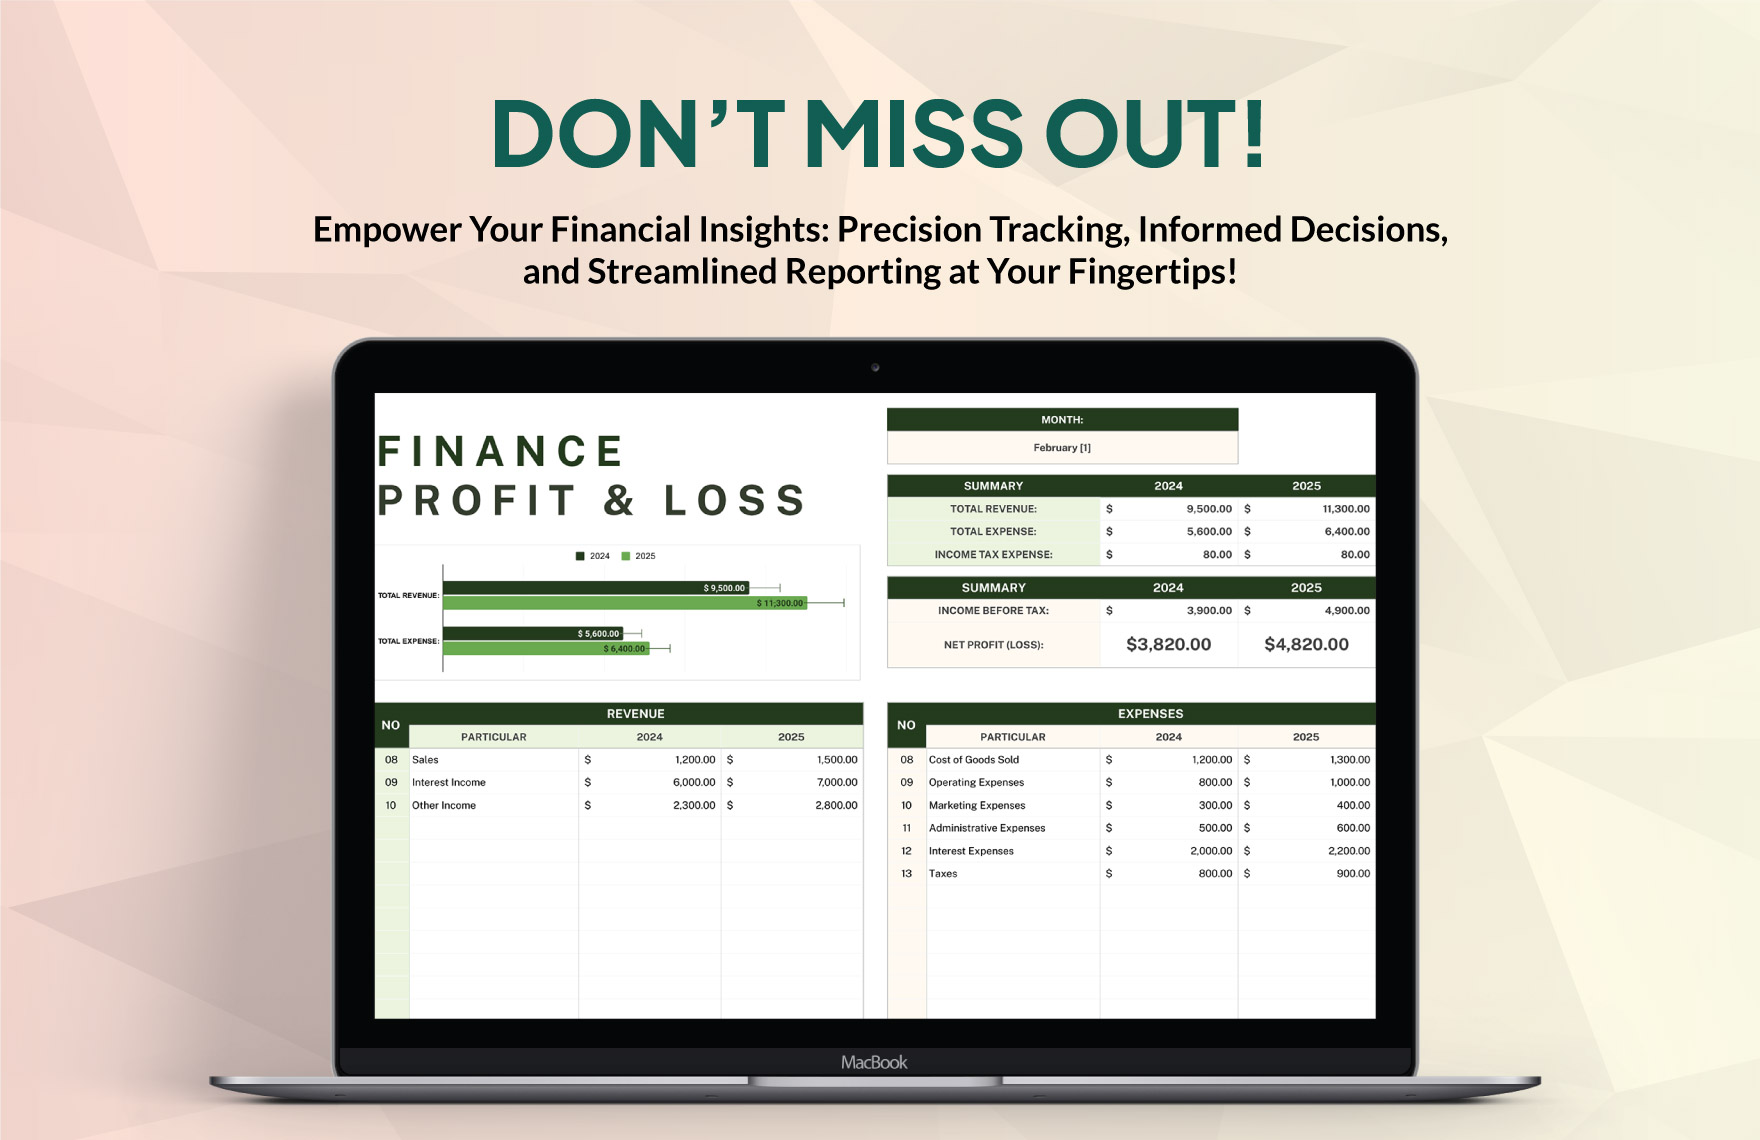 Finance Profit and Loss Report Template